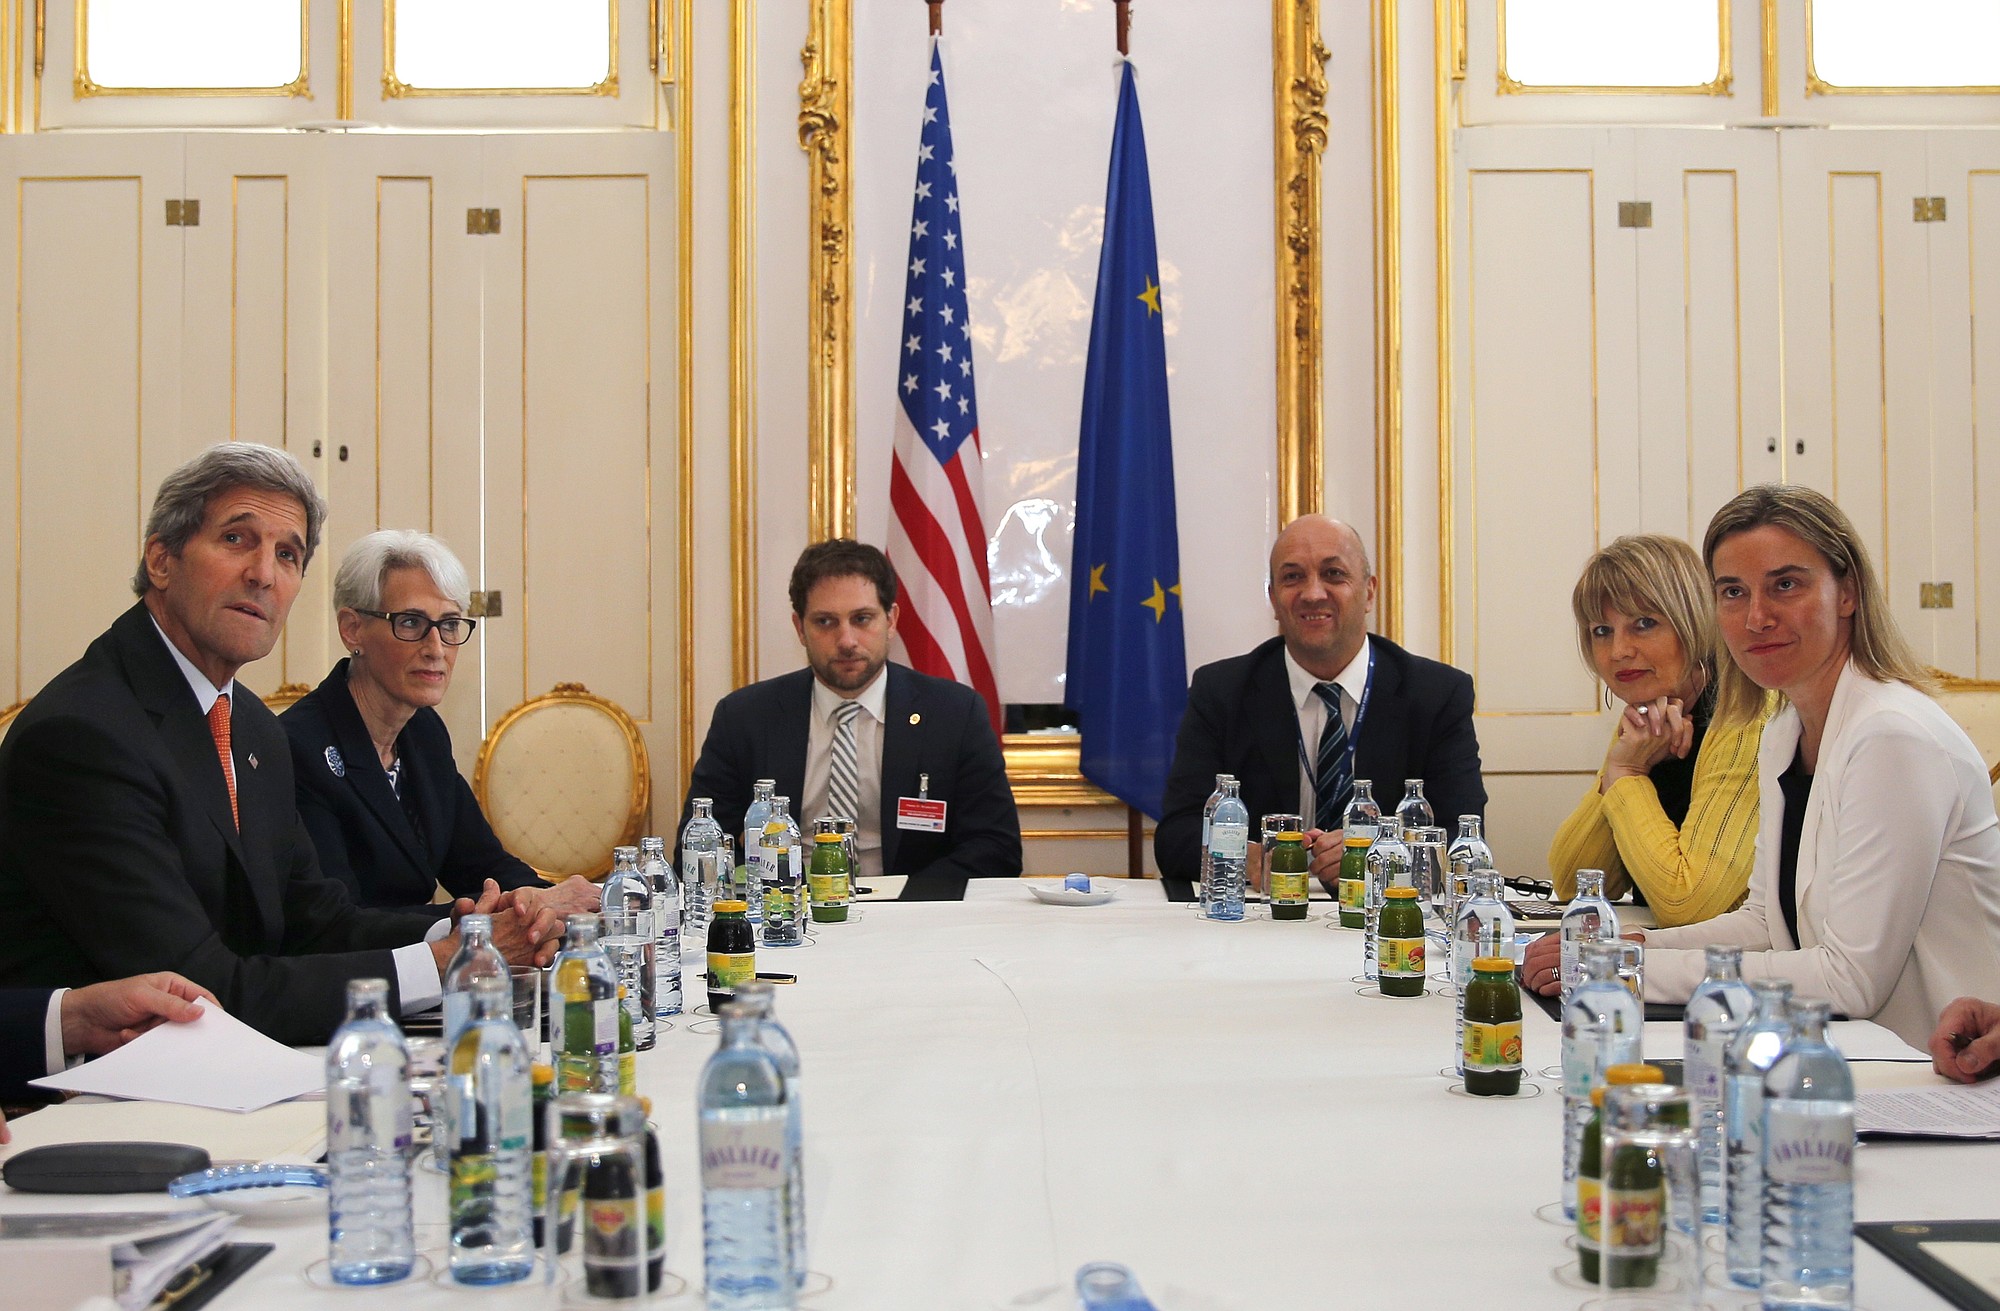 U.S. Secretary of State John Kerry, left, and U.S. Under Secretary for Political Affairs Wendy Sherman, 2nd left, meet with European Union foreign policy chief Federica Mogherini, right, at a hotel in Vienna, on Sunday. A senior U.S.